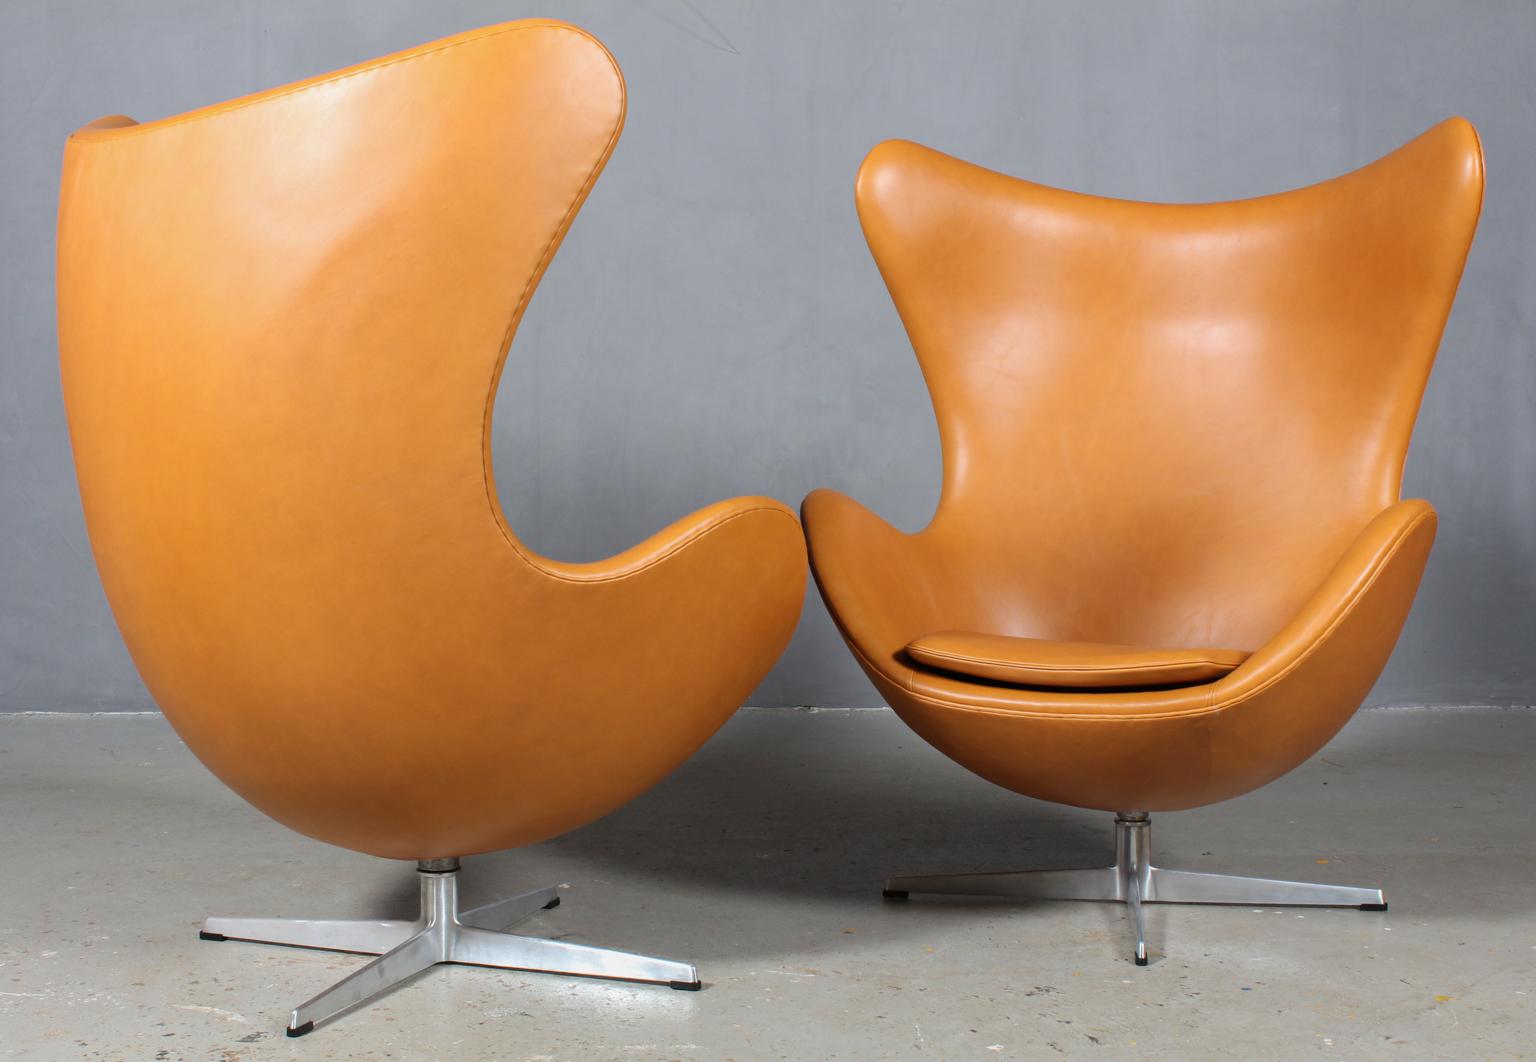 Arne Jacobsen set of lounge chairs model Egg. New upholstered with Dakar tan aniline leather.

Four star profilated base.

Made by Fritz Hansen.

These chairs comes from Hotel Royal which Arne Jacobsen was architect for. Most of his iconic